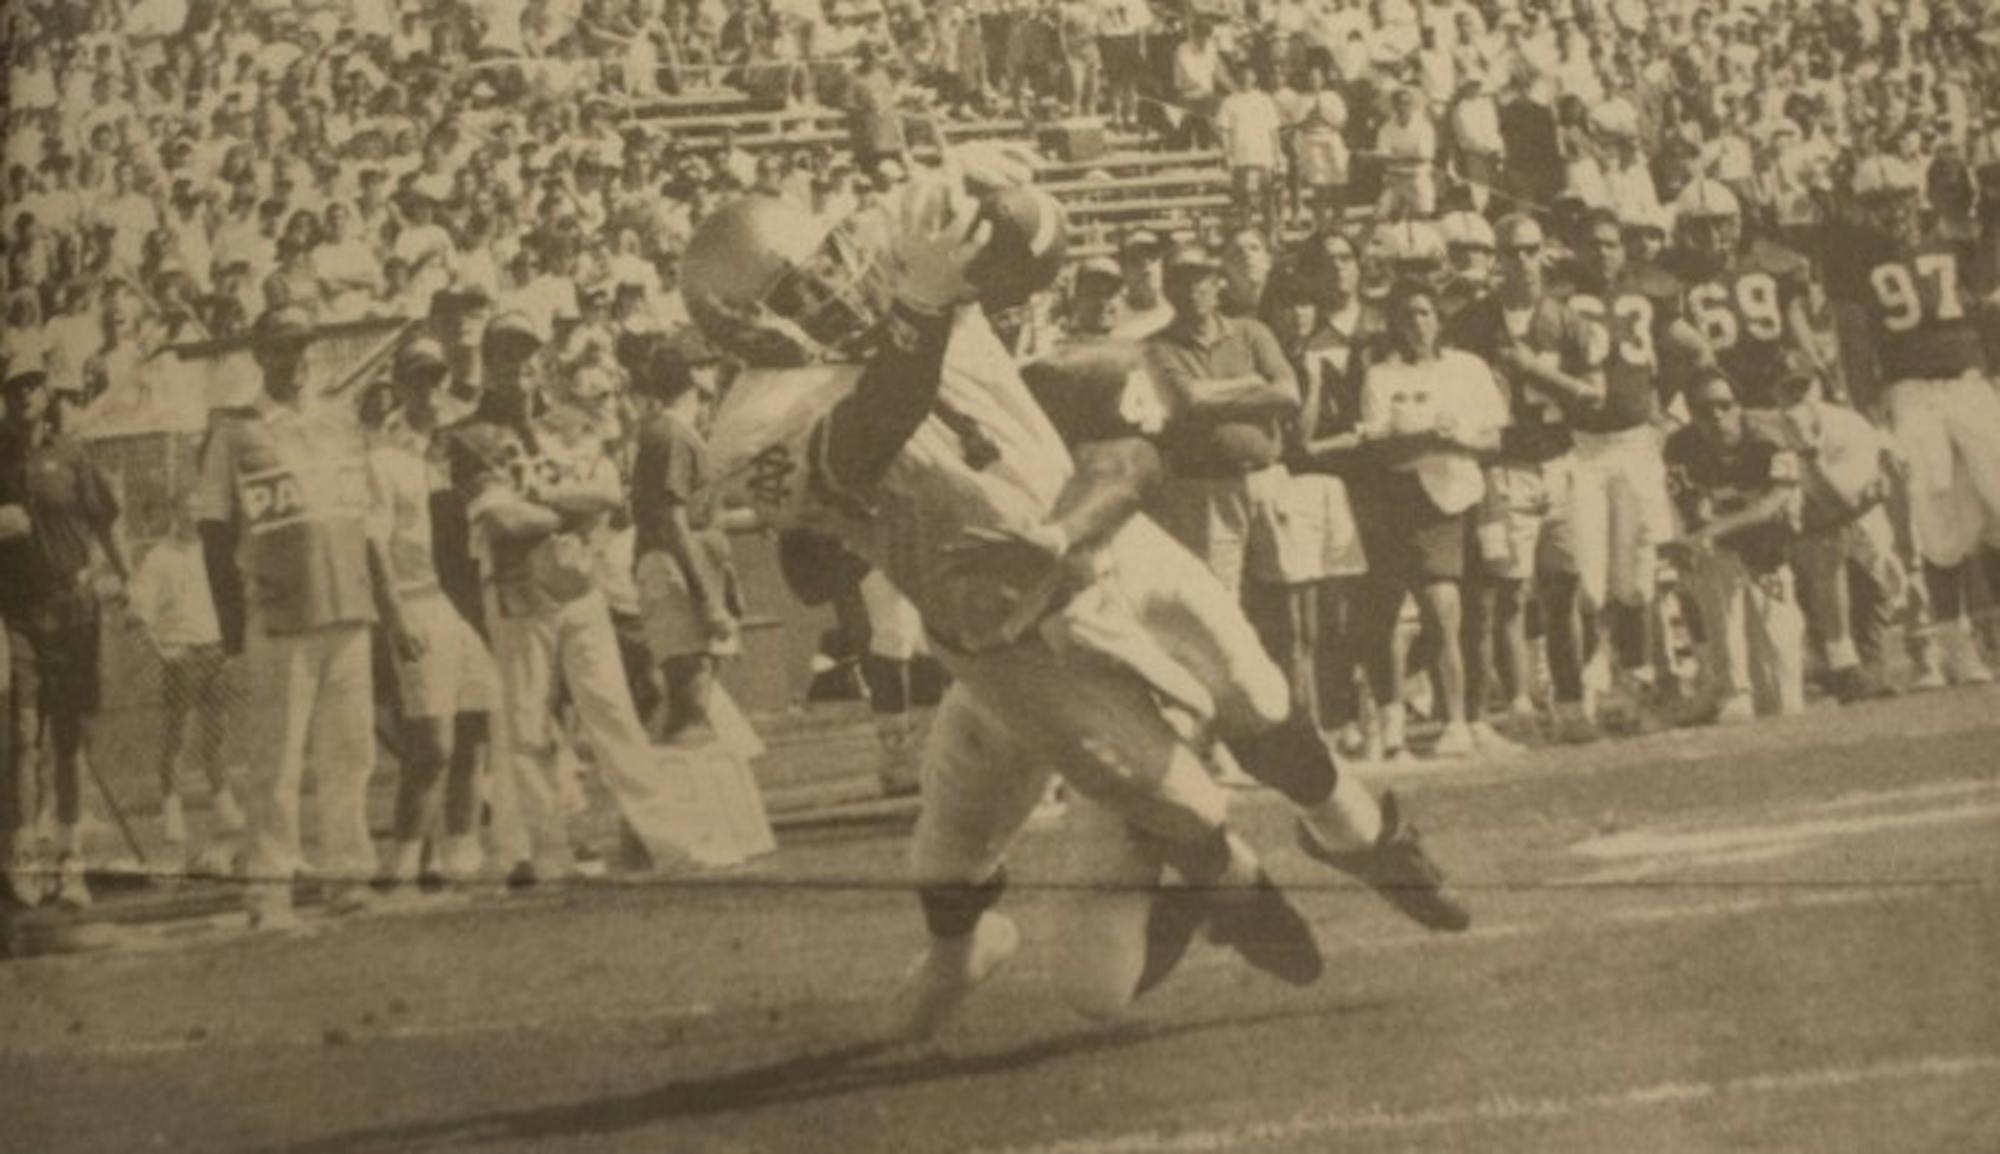 Notre Dame receiver Derrick Mayes catches a pass during a 48-20 victory at Stanford Stadium in Stanford, California on Oct. 2, 1993. The Irish finished the season 11-1 and ranked No. 2 in the polls.